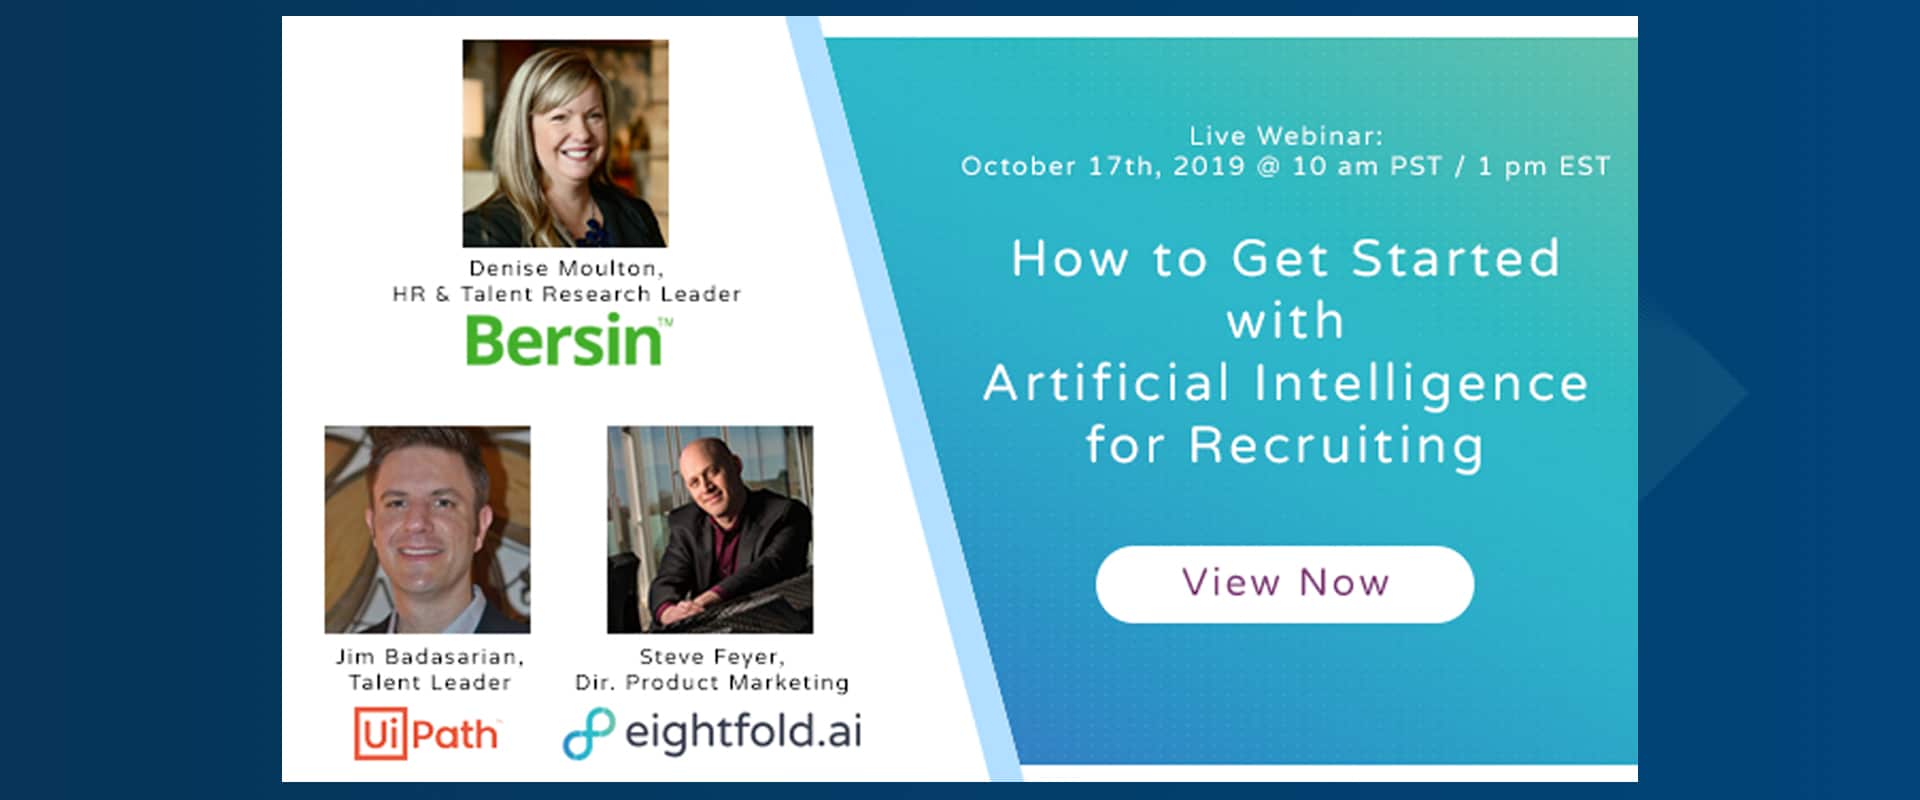 Getting Started with AI for Recruiting